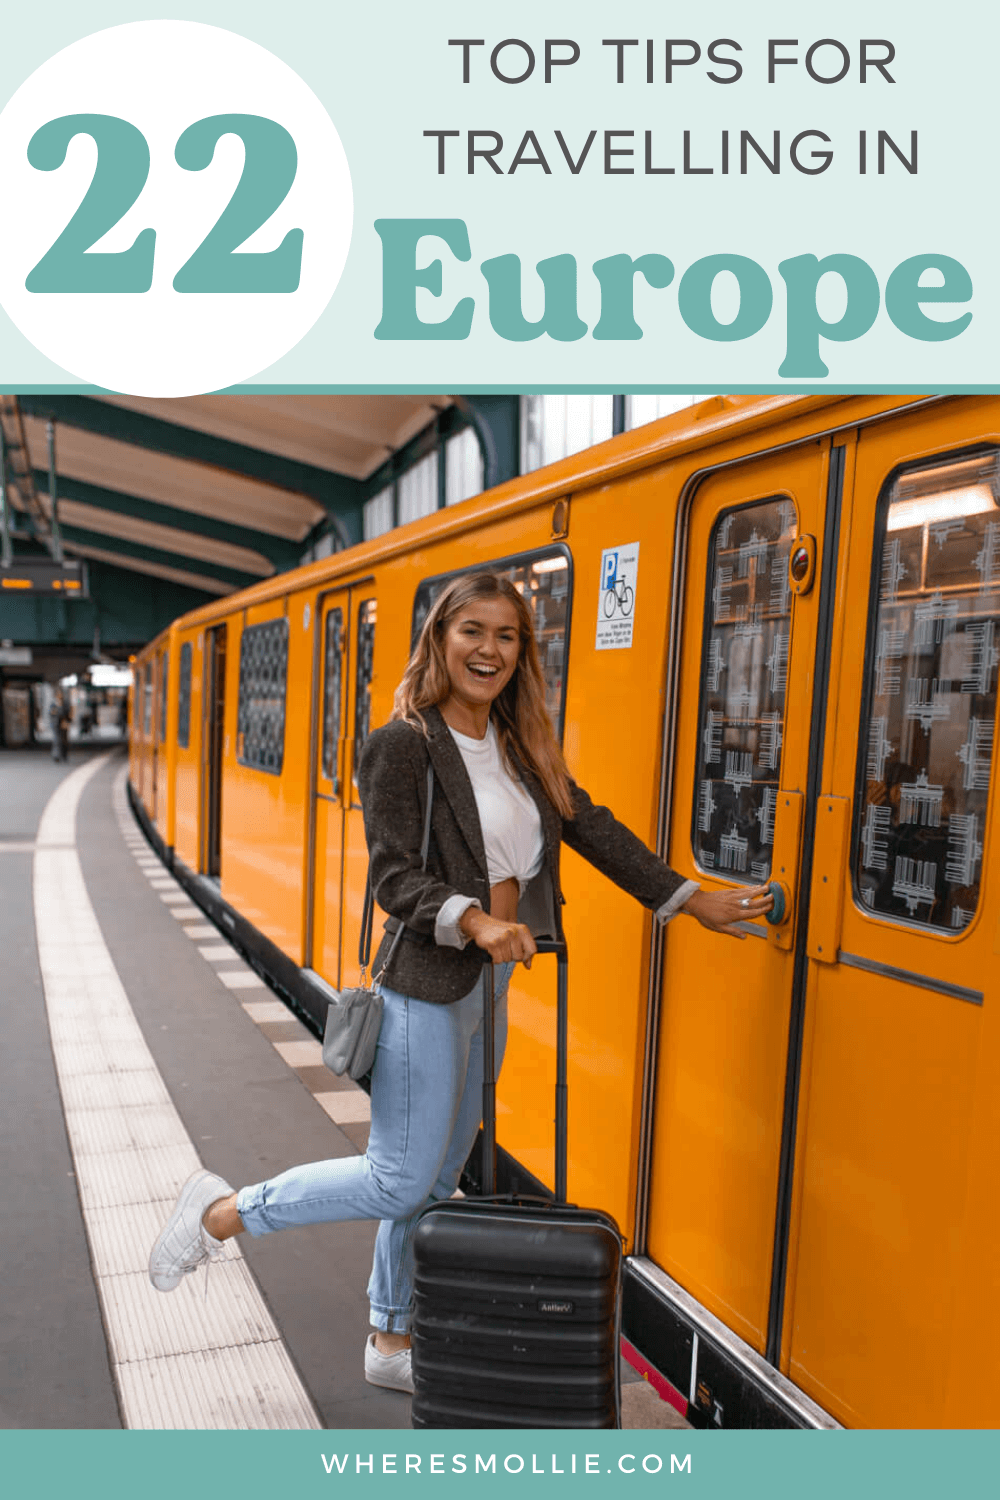 22 top tips for travelling in Europe